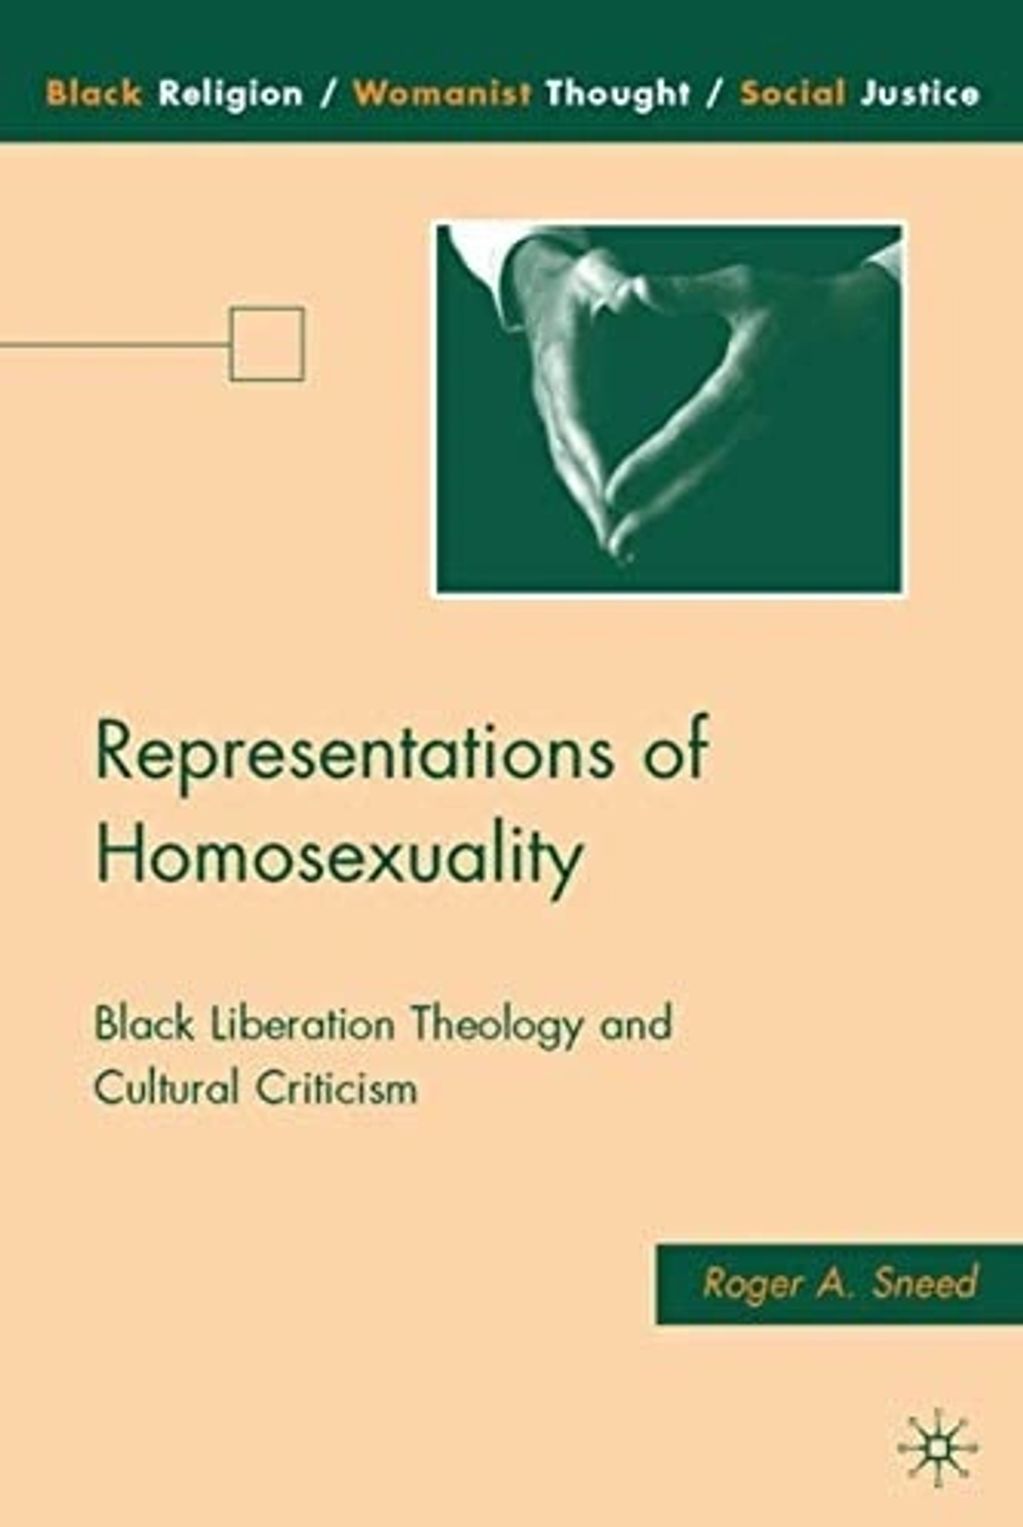 Roger A. Sneed's Representations of Homosexuality: Black Liberation Theology and Cultural Criticism